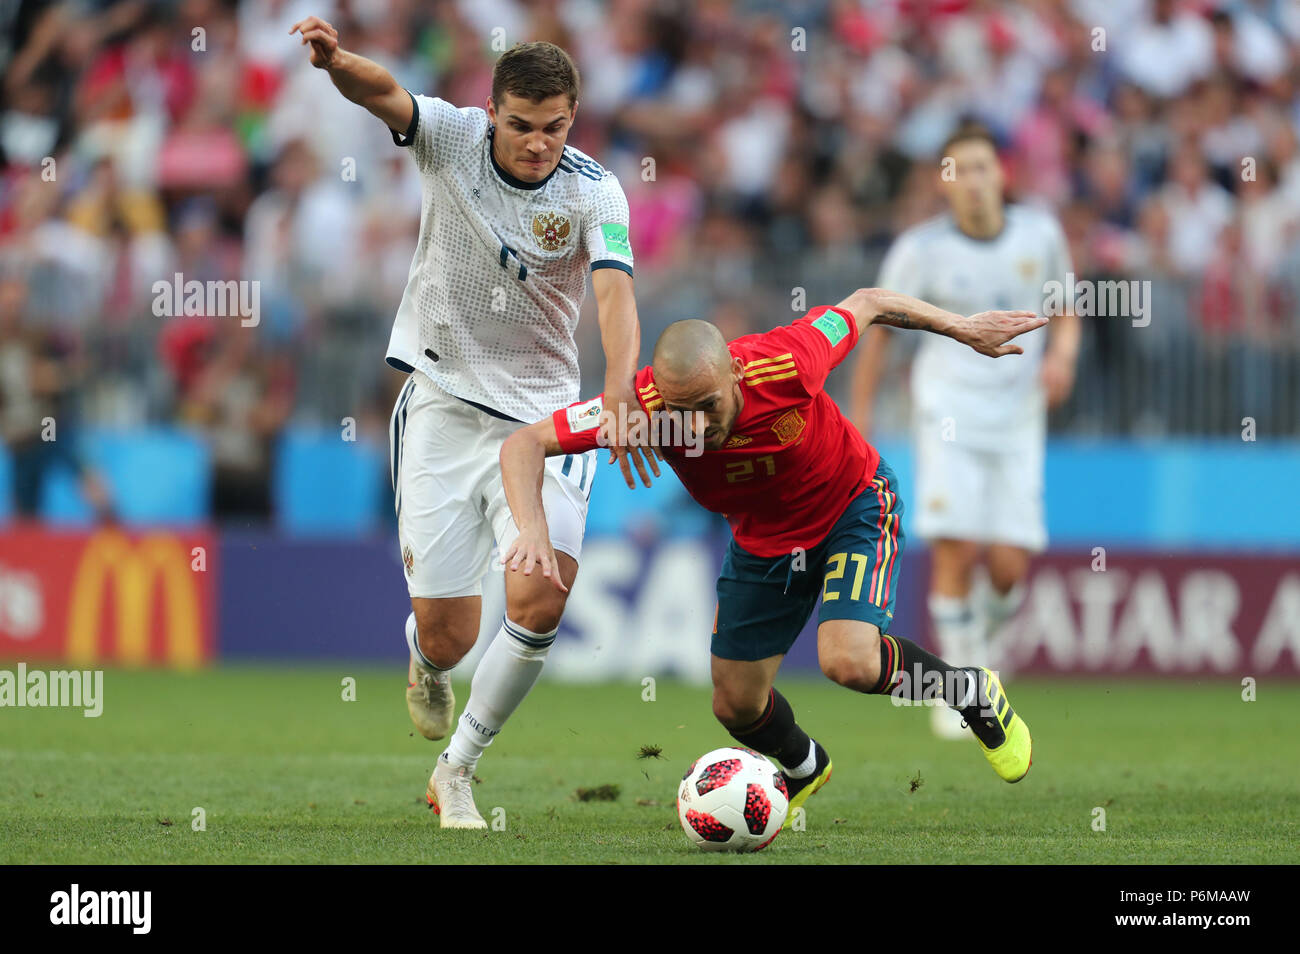 Roman Zobnin & David Silva SPAIN V RUSSIA SPAIN V RUSSIA, 2018 FIFA WORLD CUP RUSSIA 01 July 2018 GBC9055 2018 FIFA World Cup Russia STRICTLY EDITORIAL USE ONLY. If The Player/Players Depicted In This Image Is/Are Playing For An English Club Or The England National Team. Then This Image May Only Be Used For Editorial Purposes. No Commercial Use. The Following Usages Are Also Restricted EVEN IF IN AN EDITORIAL CONTEXT: Use in conjuction with, or part of, any unauthorized audio, video, data, fixture lists, club/league logos, Betting, Games or any 'live' services. Also Restri Stock Photo